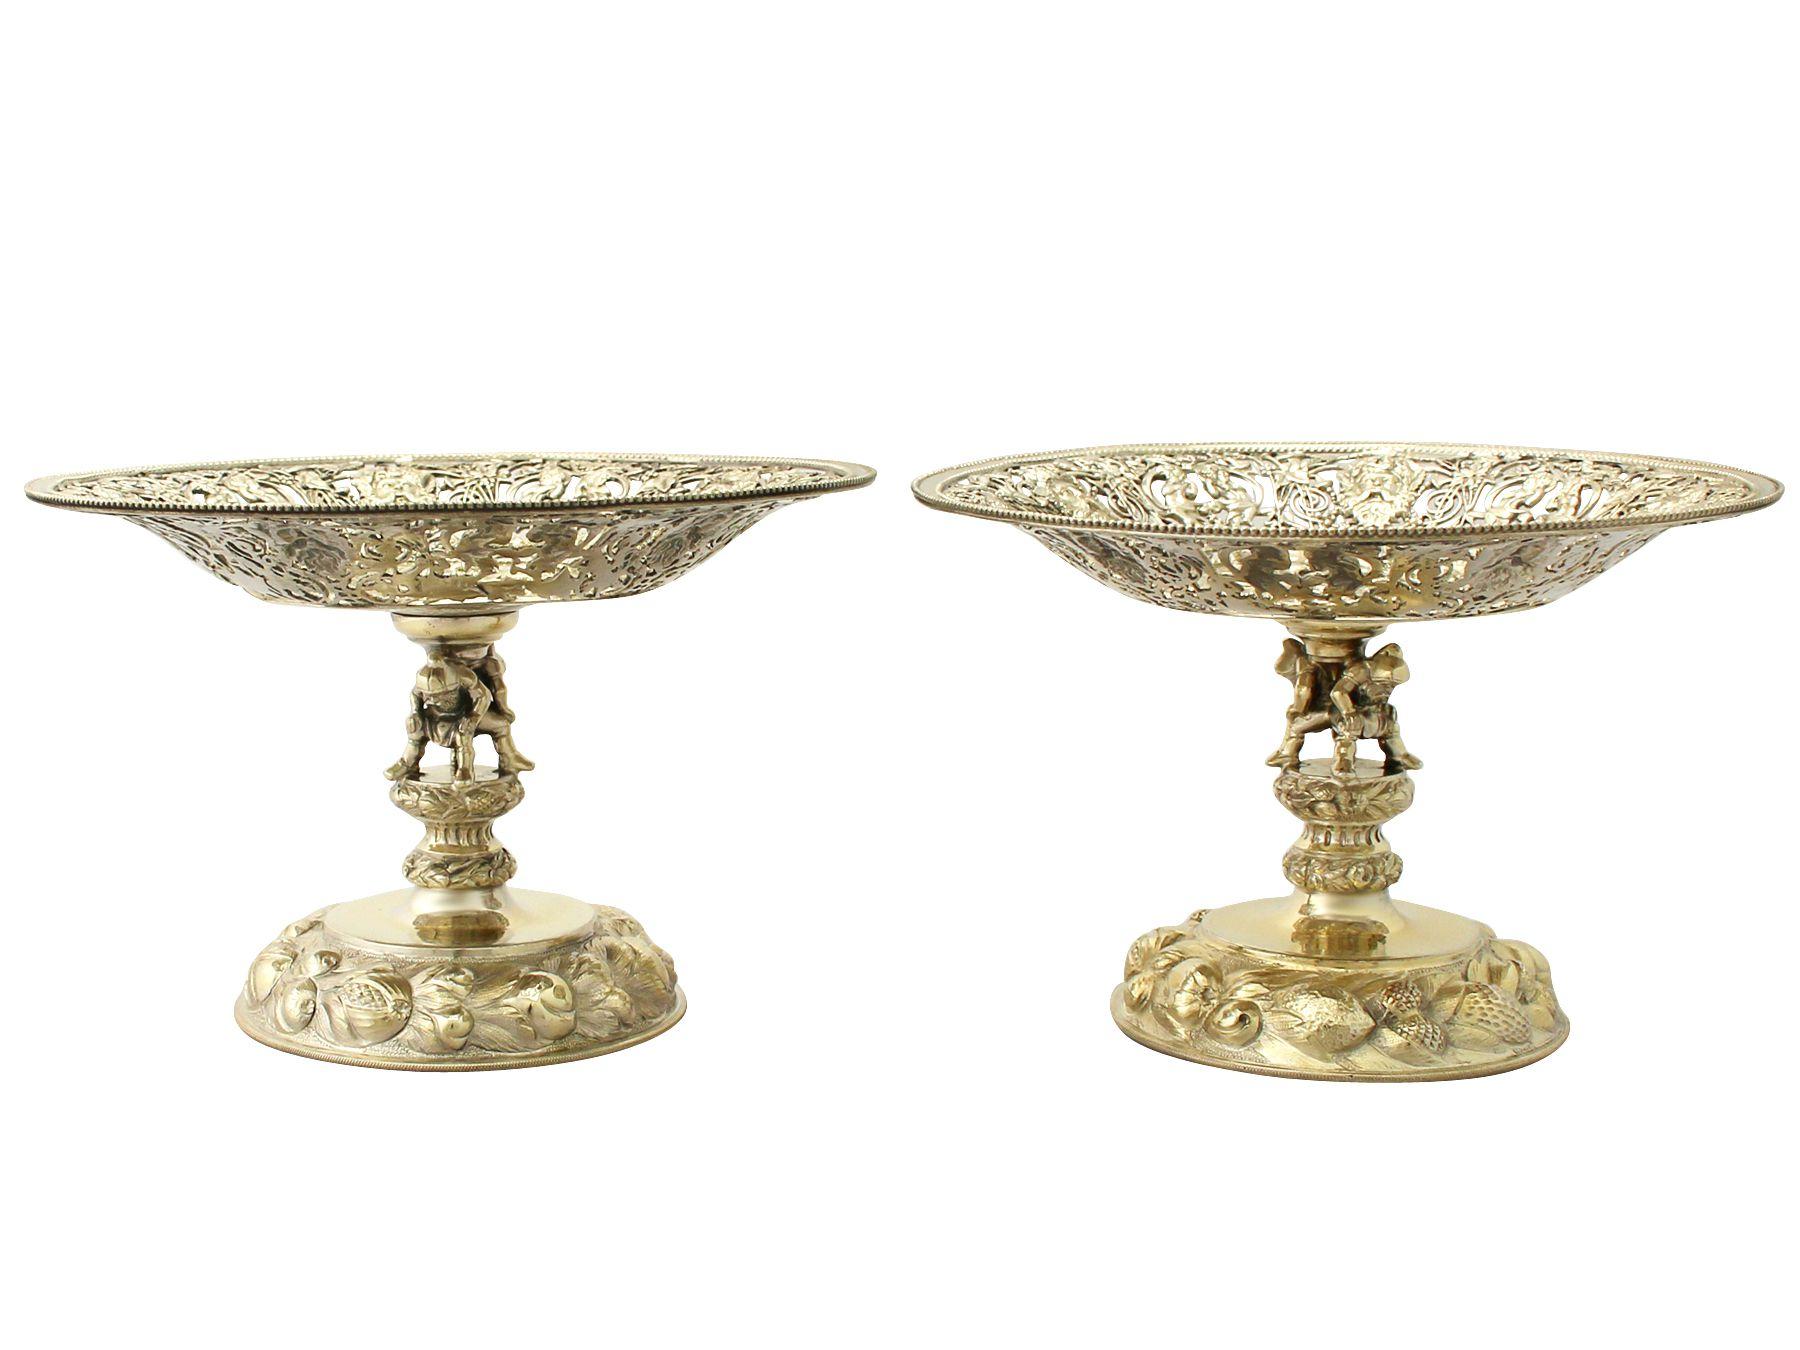 A magnificent, fine and impressive, pair of antique German silver tazzas or centerpieces; an addition to our continental silverware collection.

This magnificent antique German gilt silver tazzas or centerpieces has a circular rounded form onto a